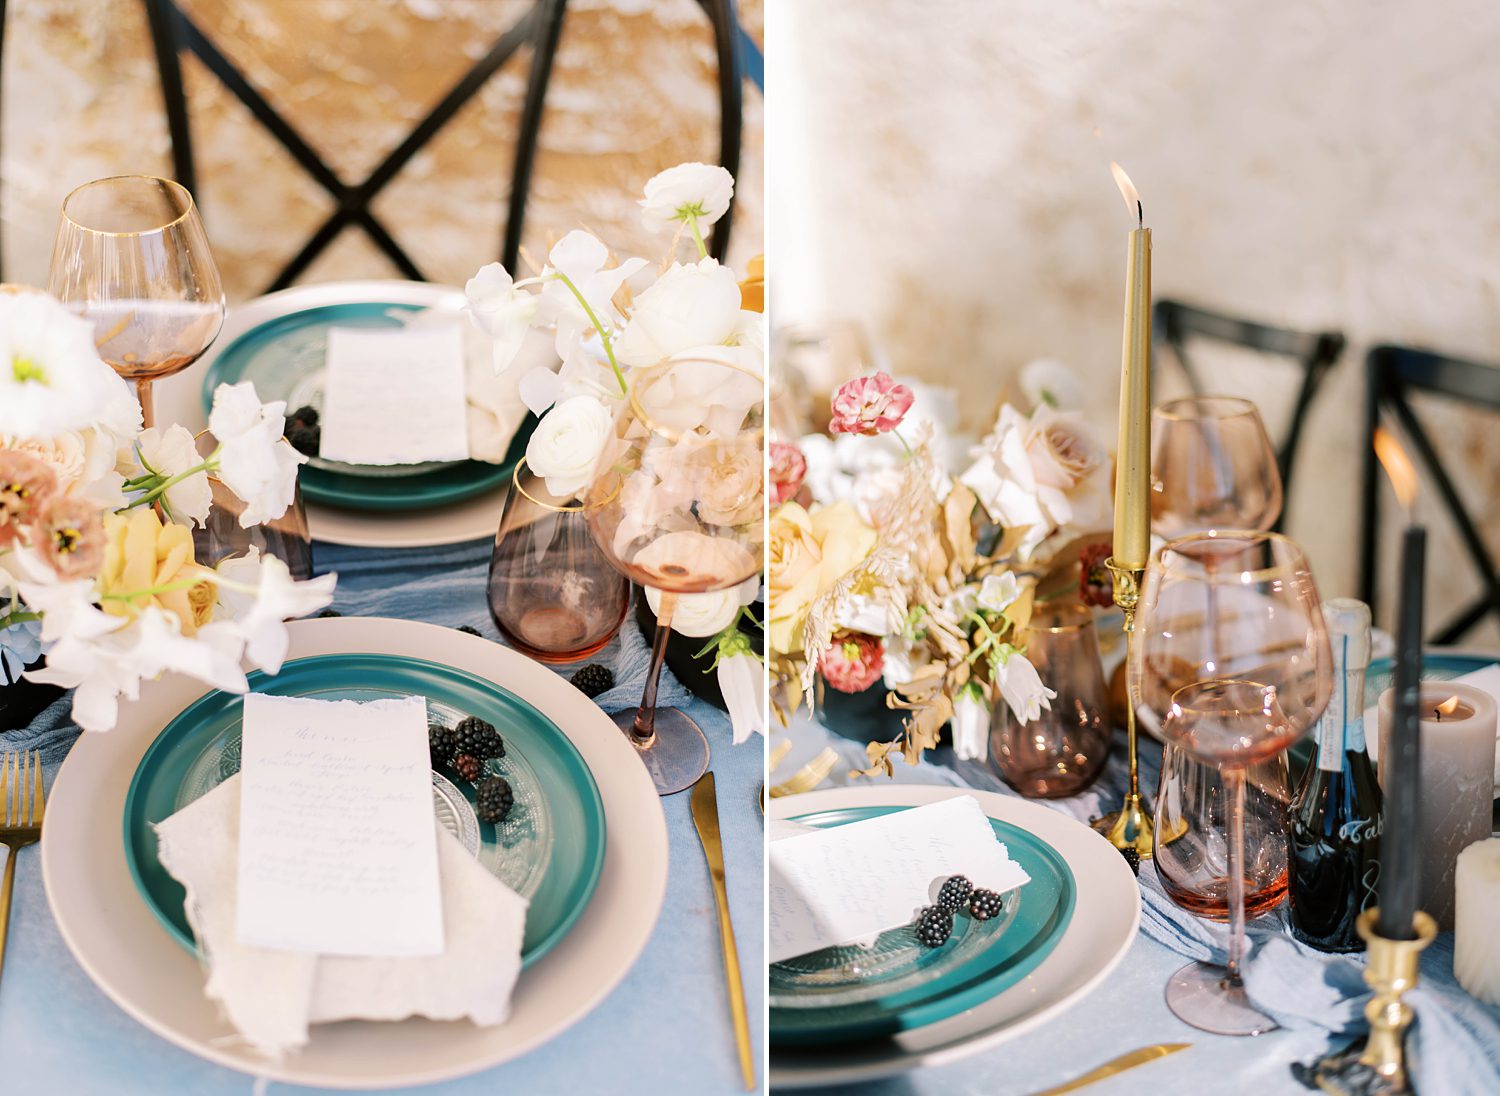 wedding reception outside on teal plate